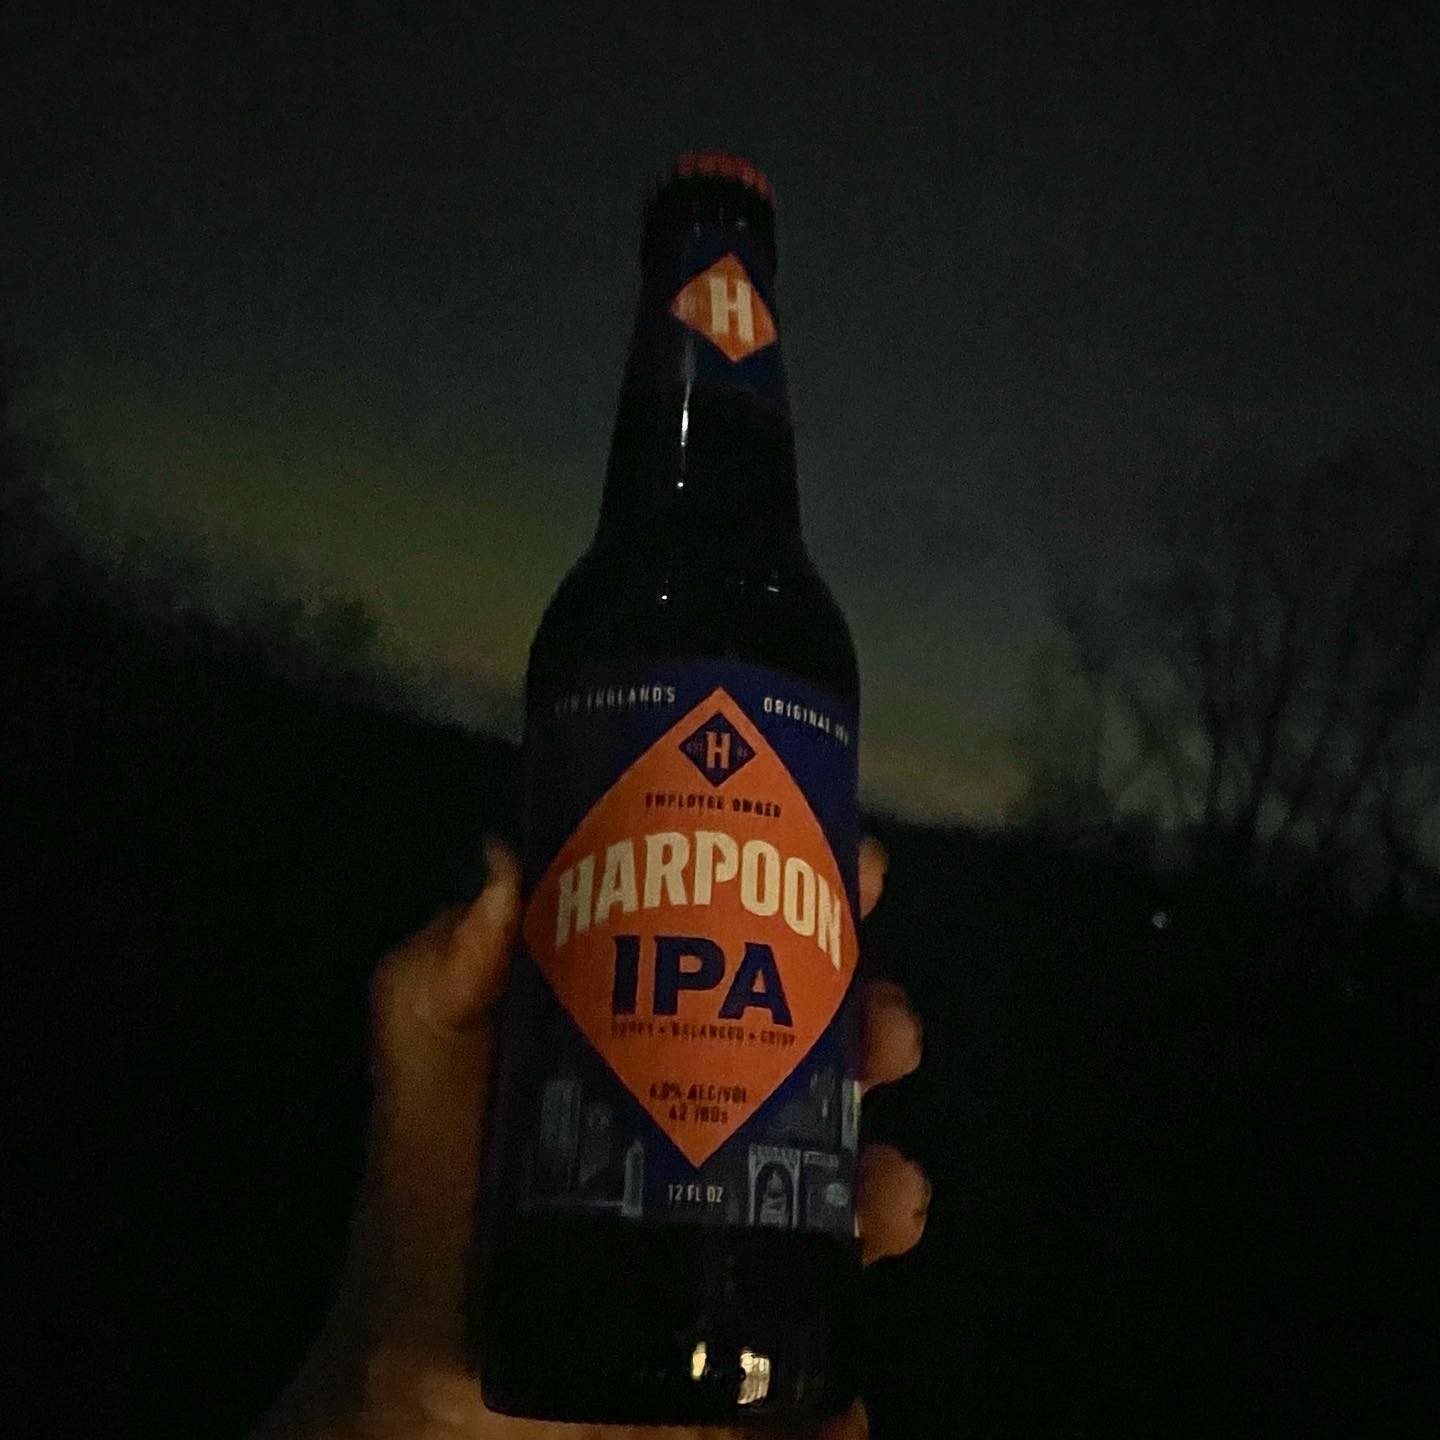 On this cold, dark New England night, enjoying this cold, amber IPA. New England’s own @harpoonbrewery (Boston).